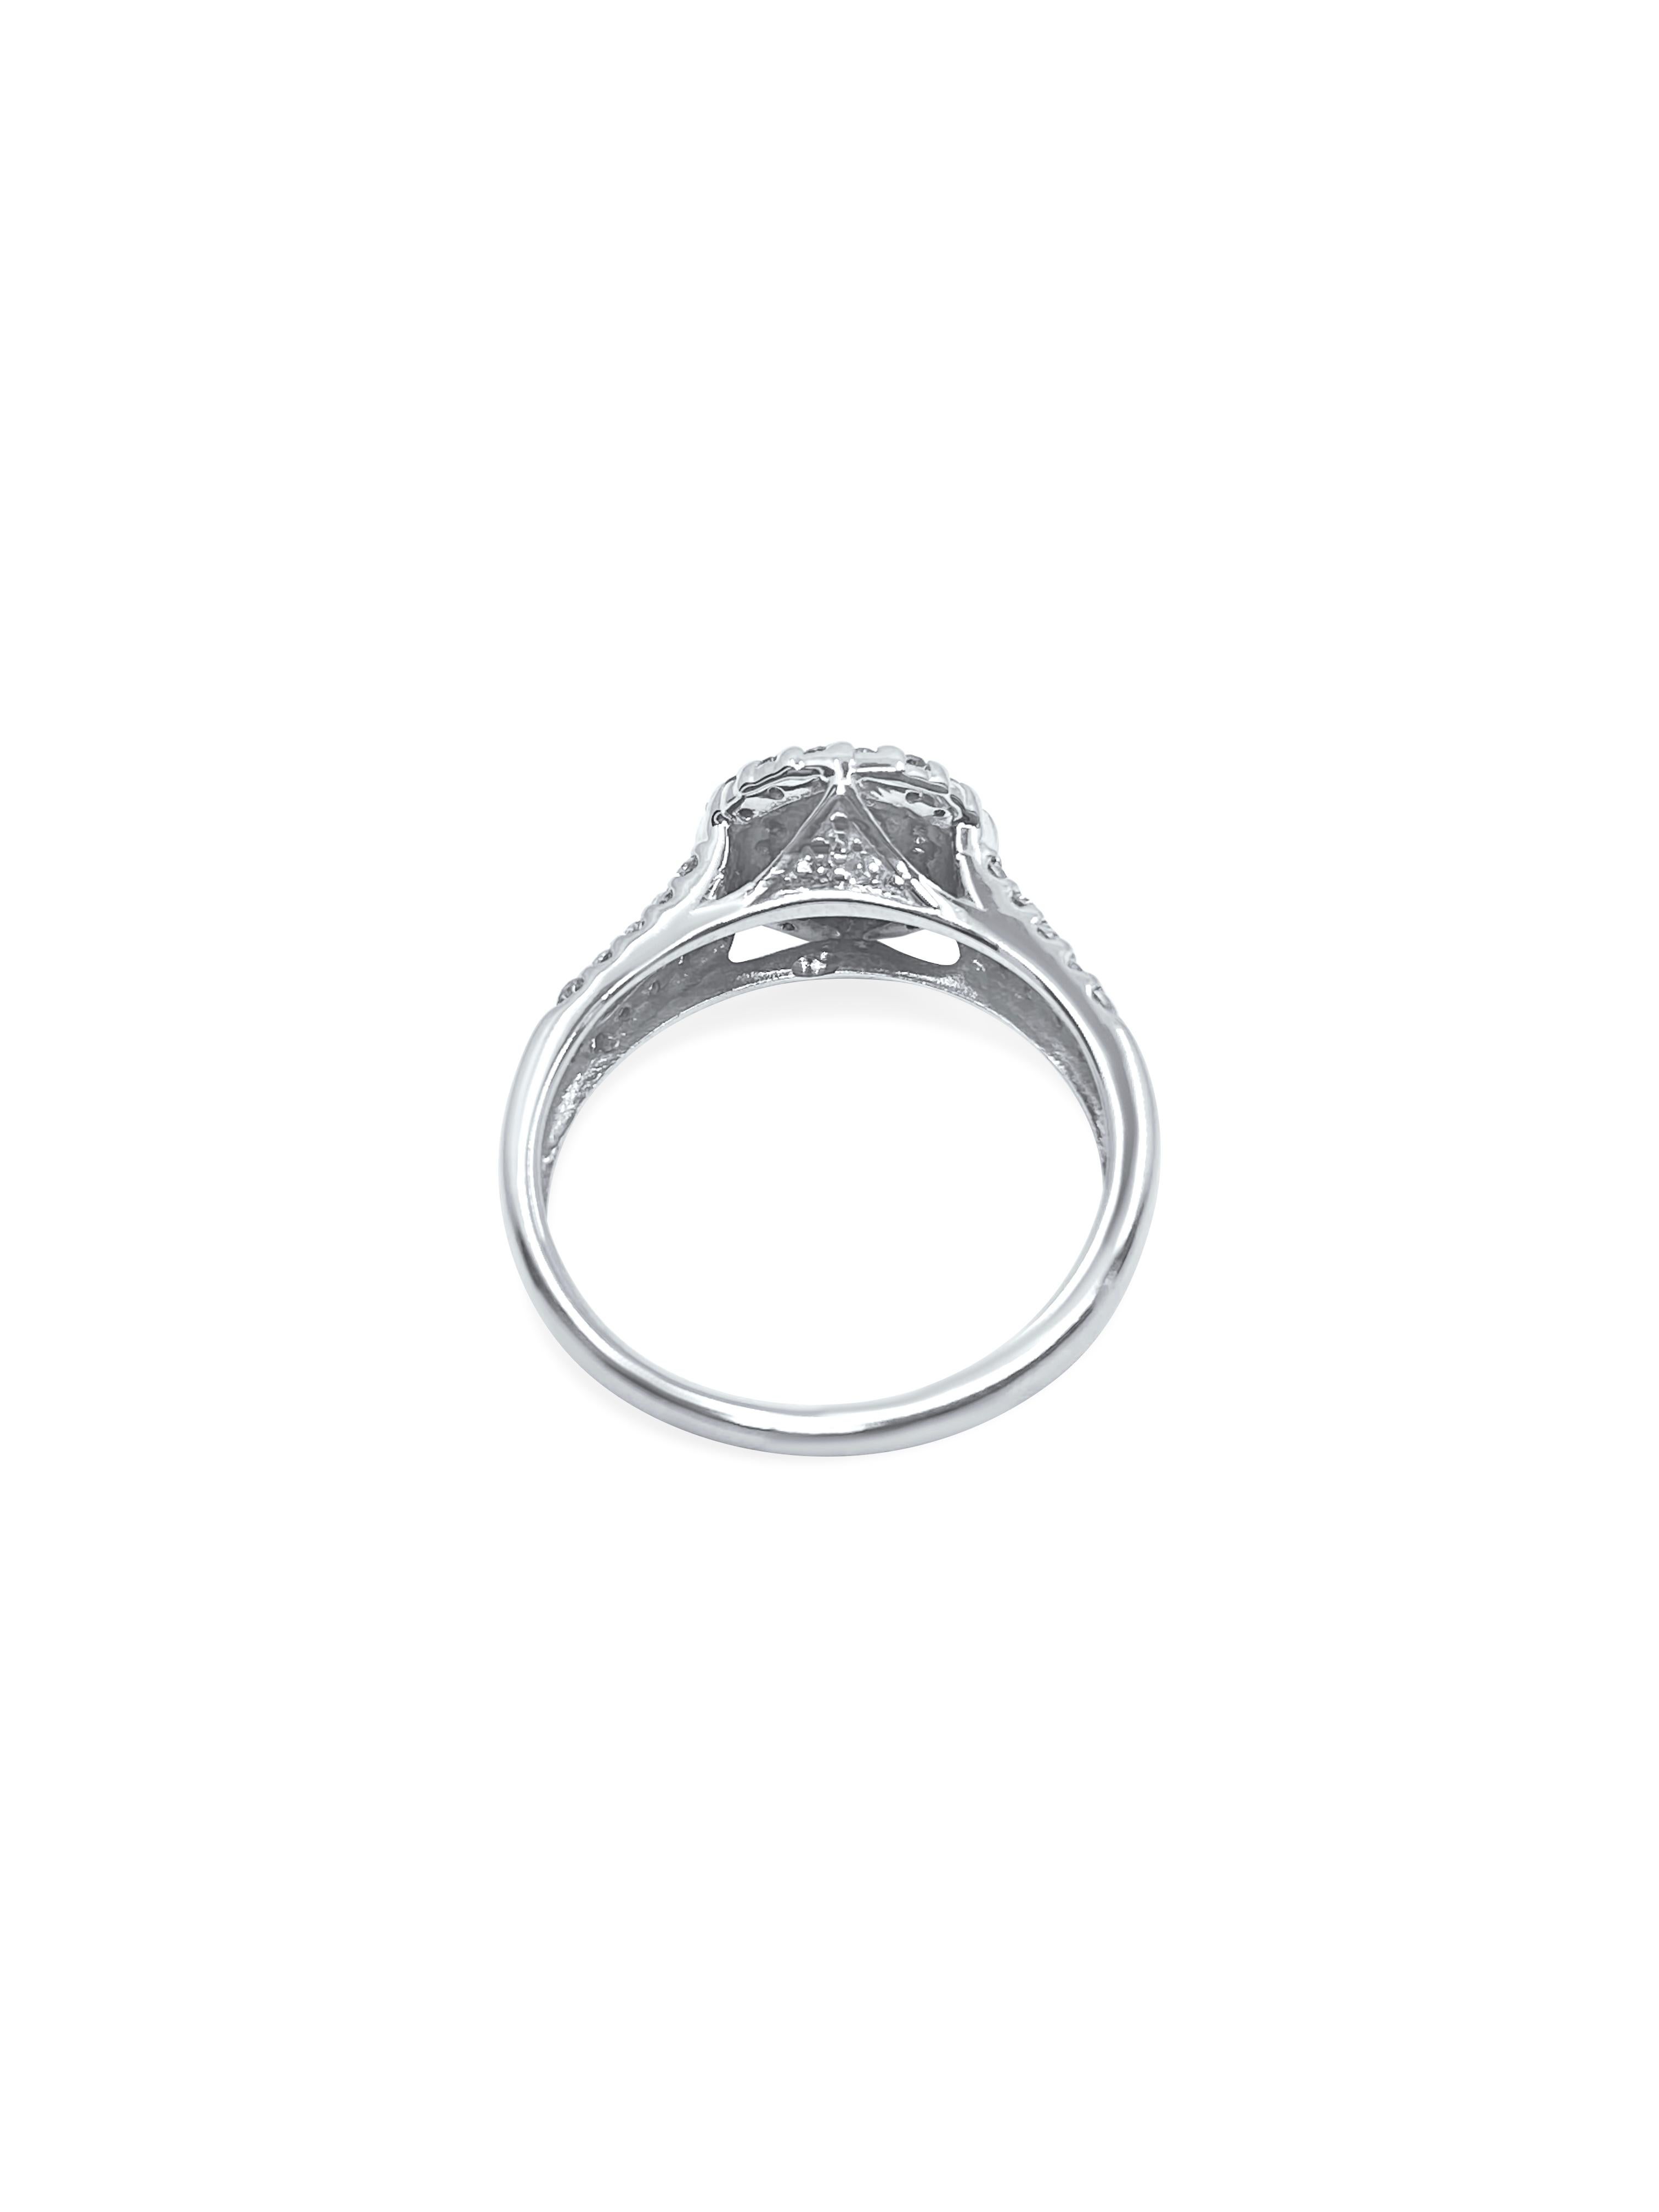 In stunning 14k white gold, this art deco-style diamond ring features a total of 1.12 carats of natural earth-mined diamonds. With a mix of round brilliant, marquise, and baguette cuts, these diamonds offer a captivating display. The diamonds boast